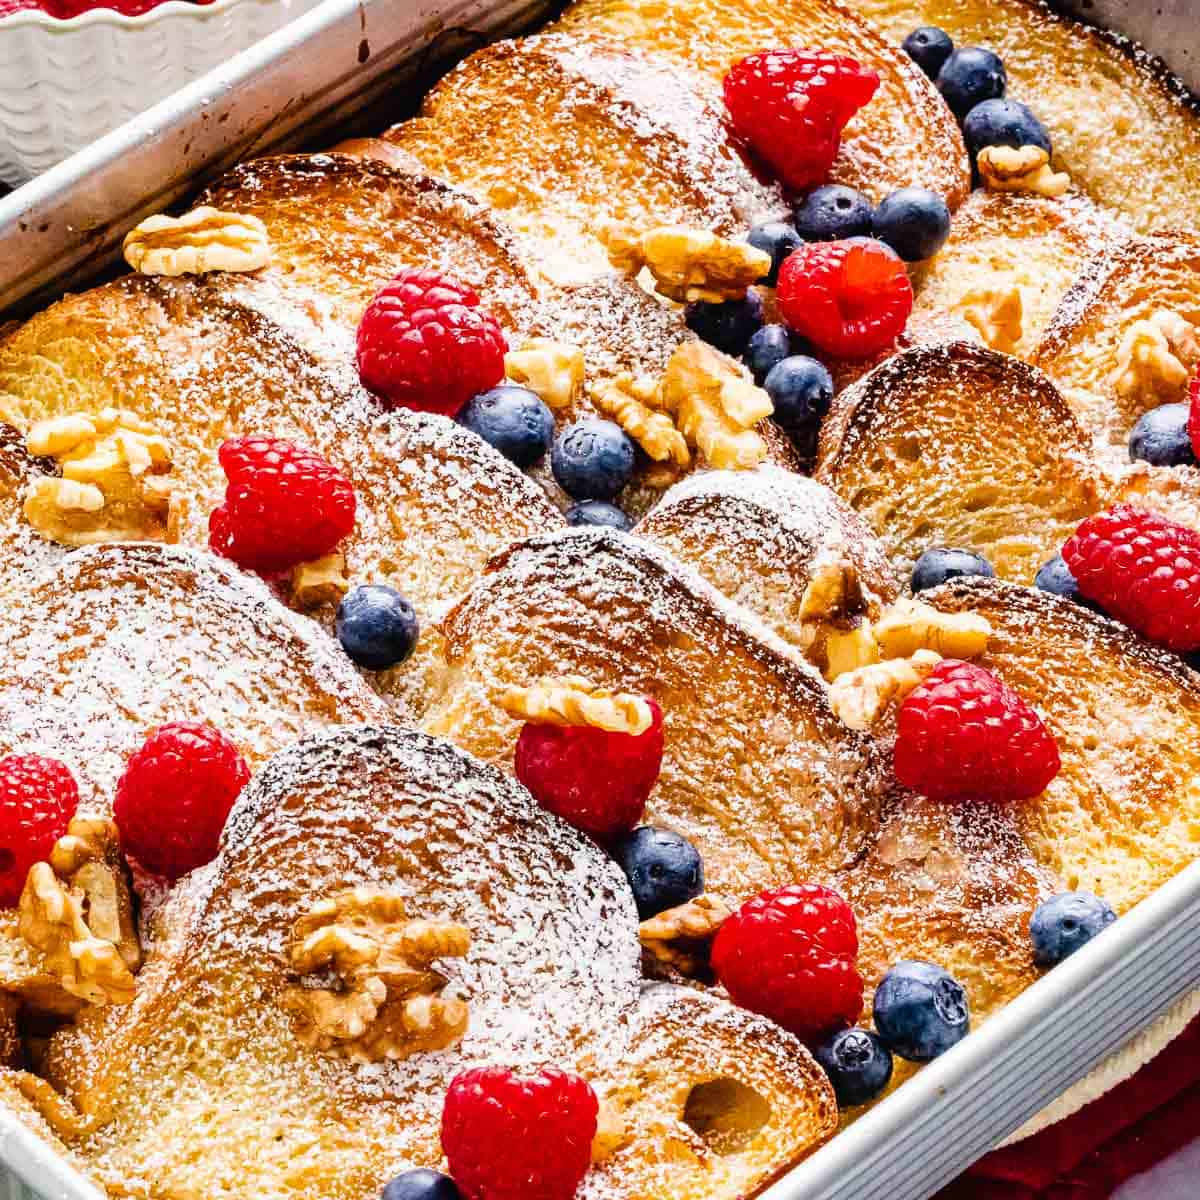 Baked French Toast Casserole with crunchy golden brown crust topped with berries and nuts.